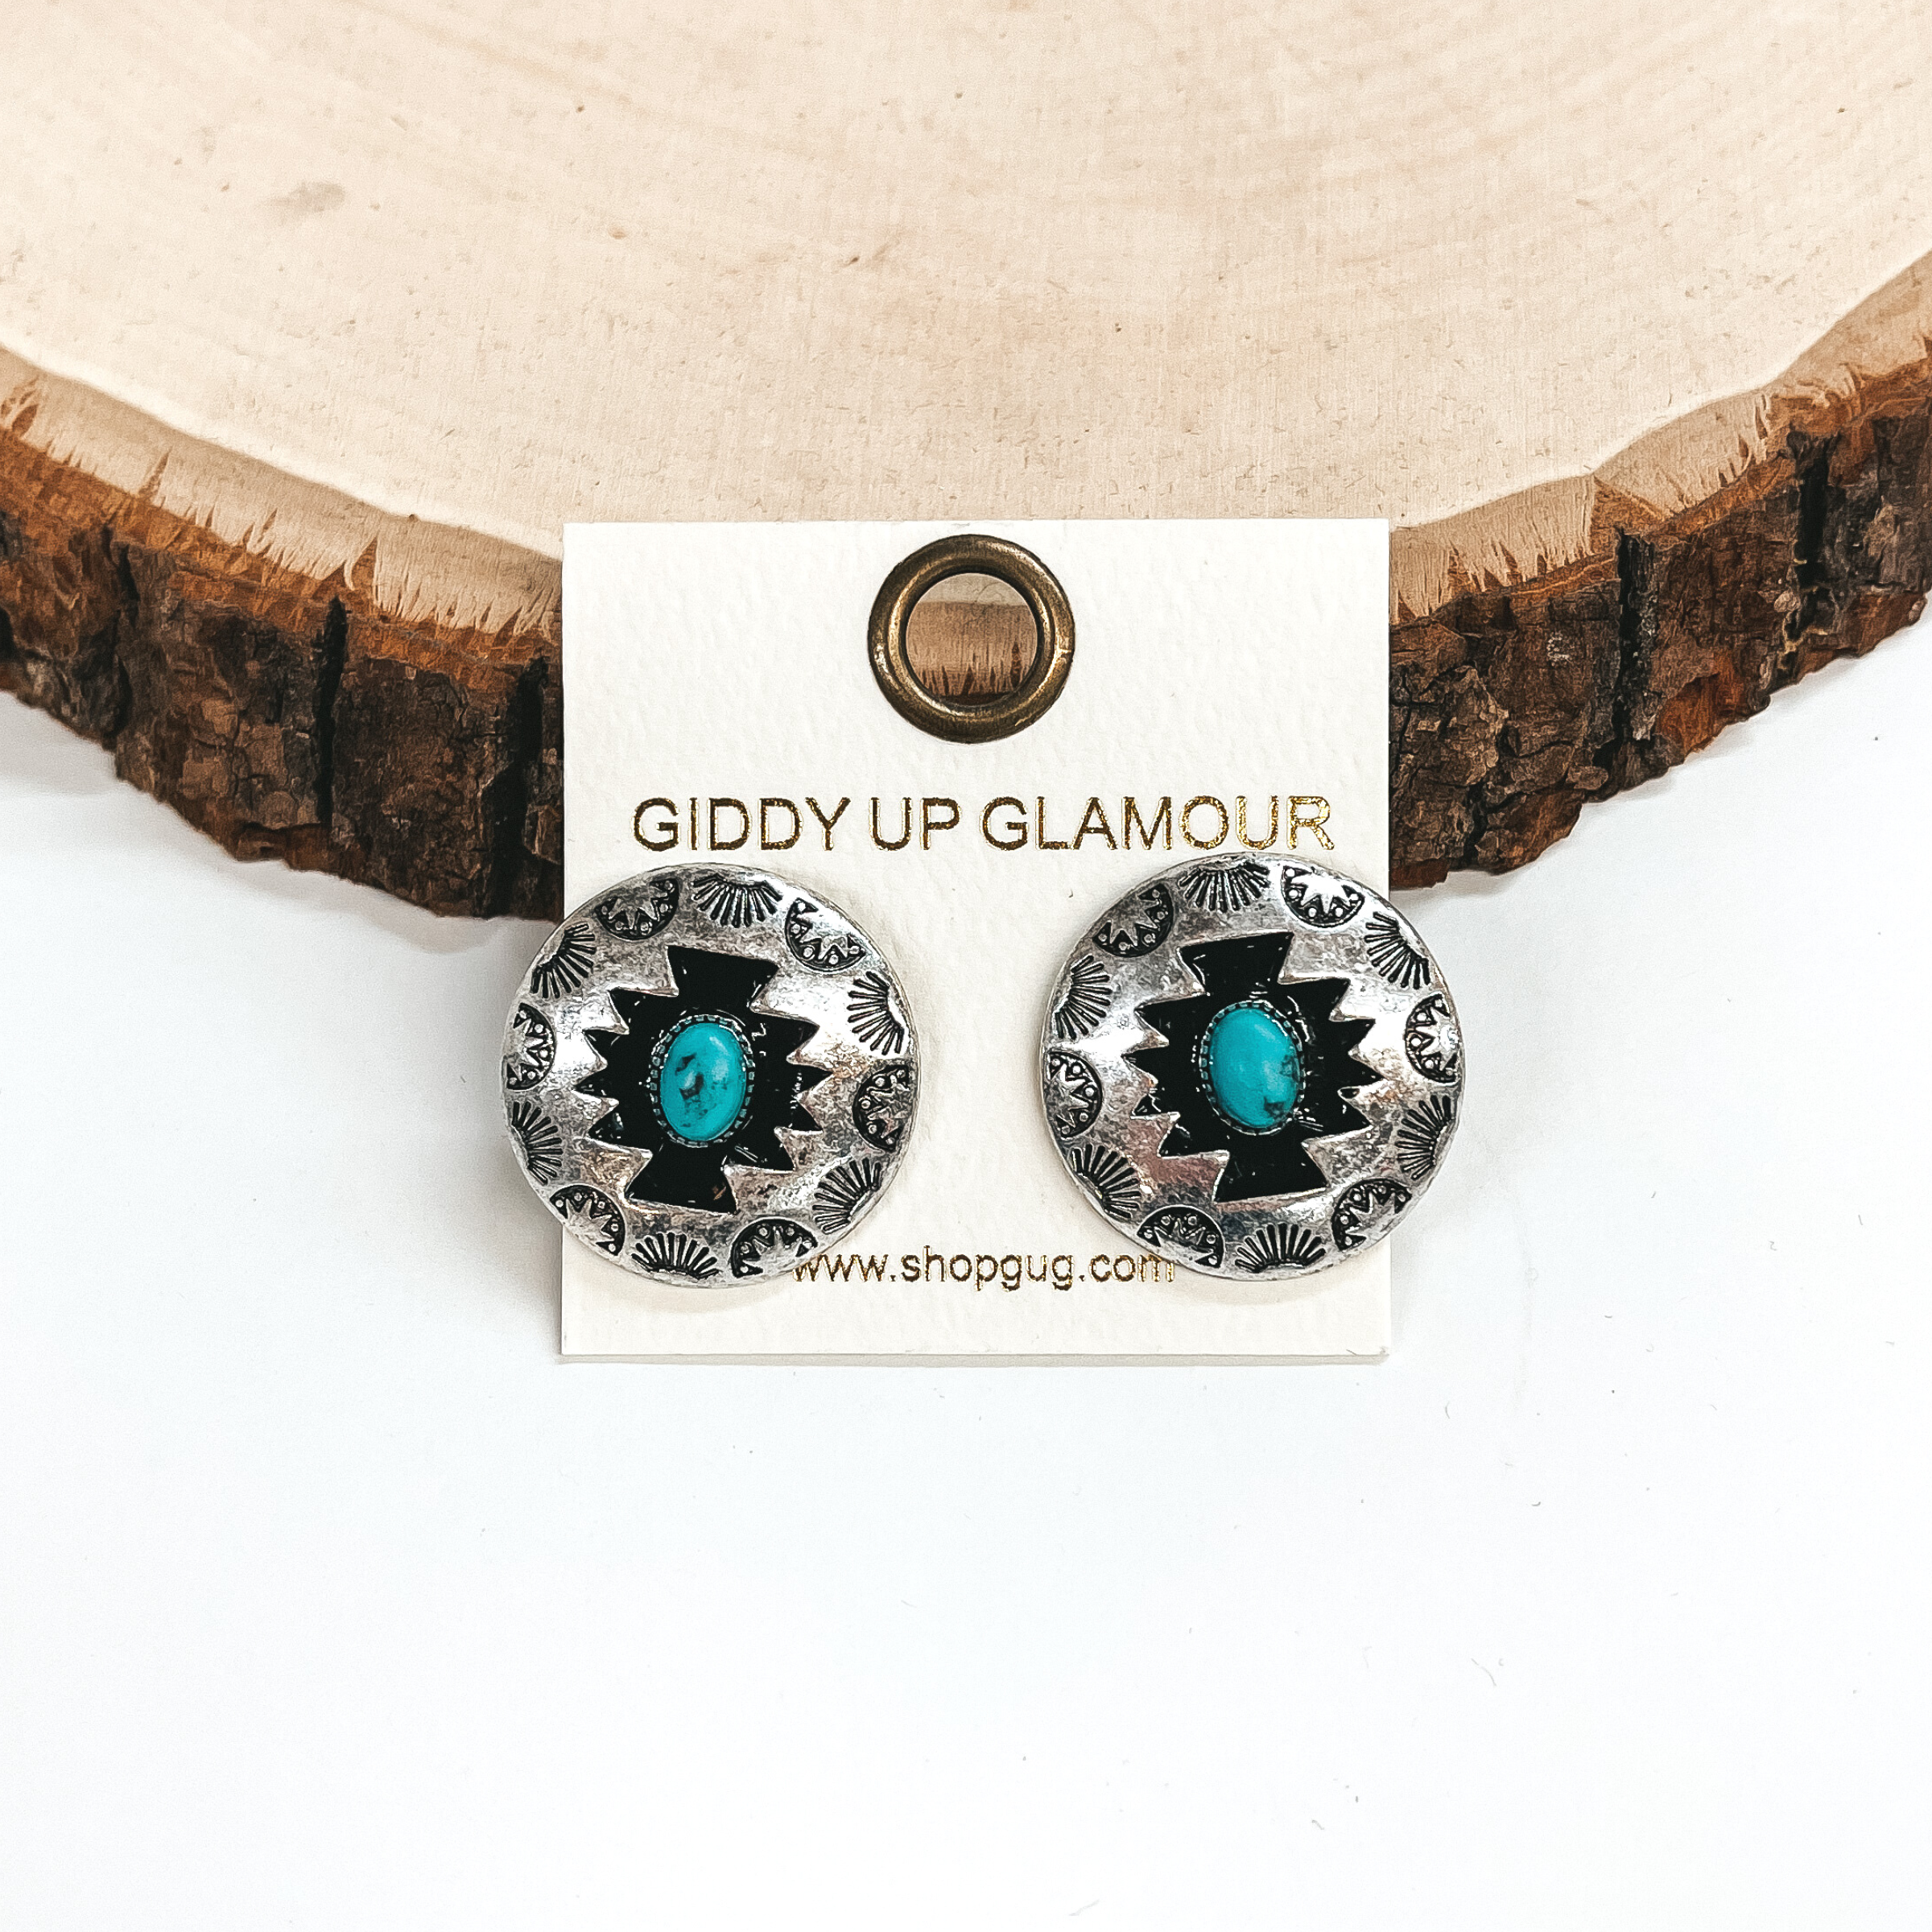 These are silver circle post back earrings with  aztec design and a stone in the center, the stone  is turquoise. These earrings are taken on a white  background and leaned up against a slab of wood.